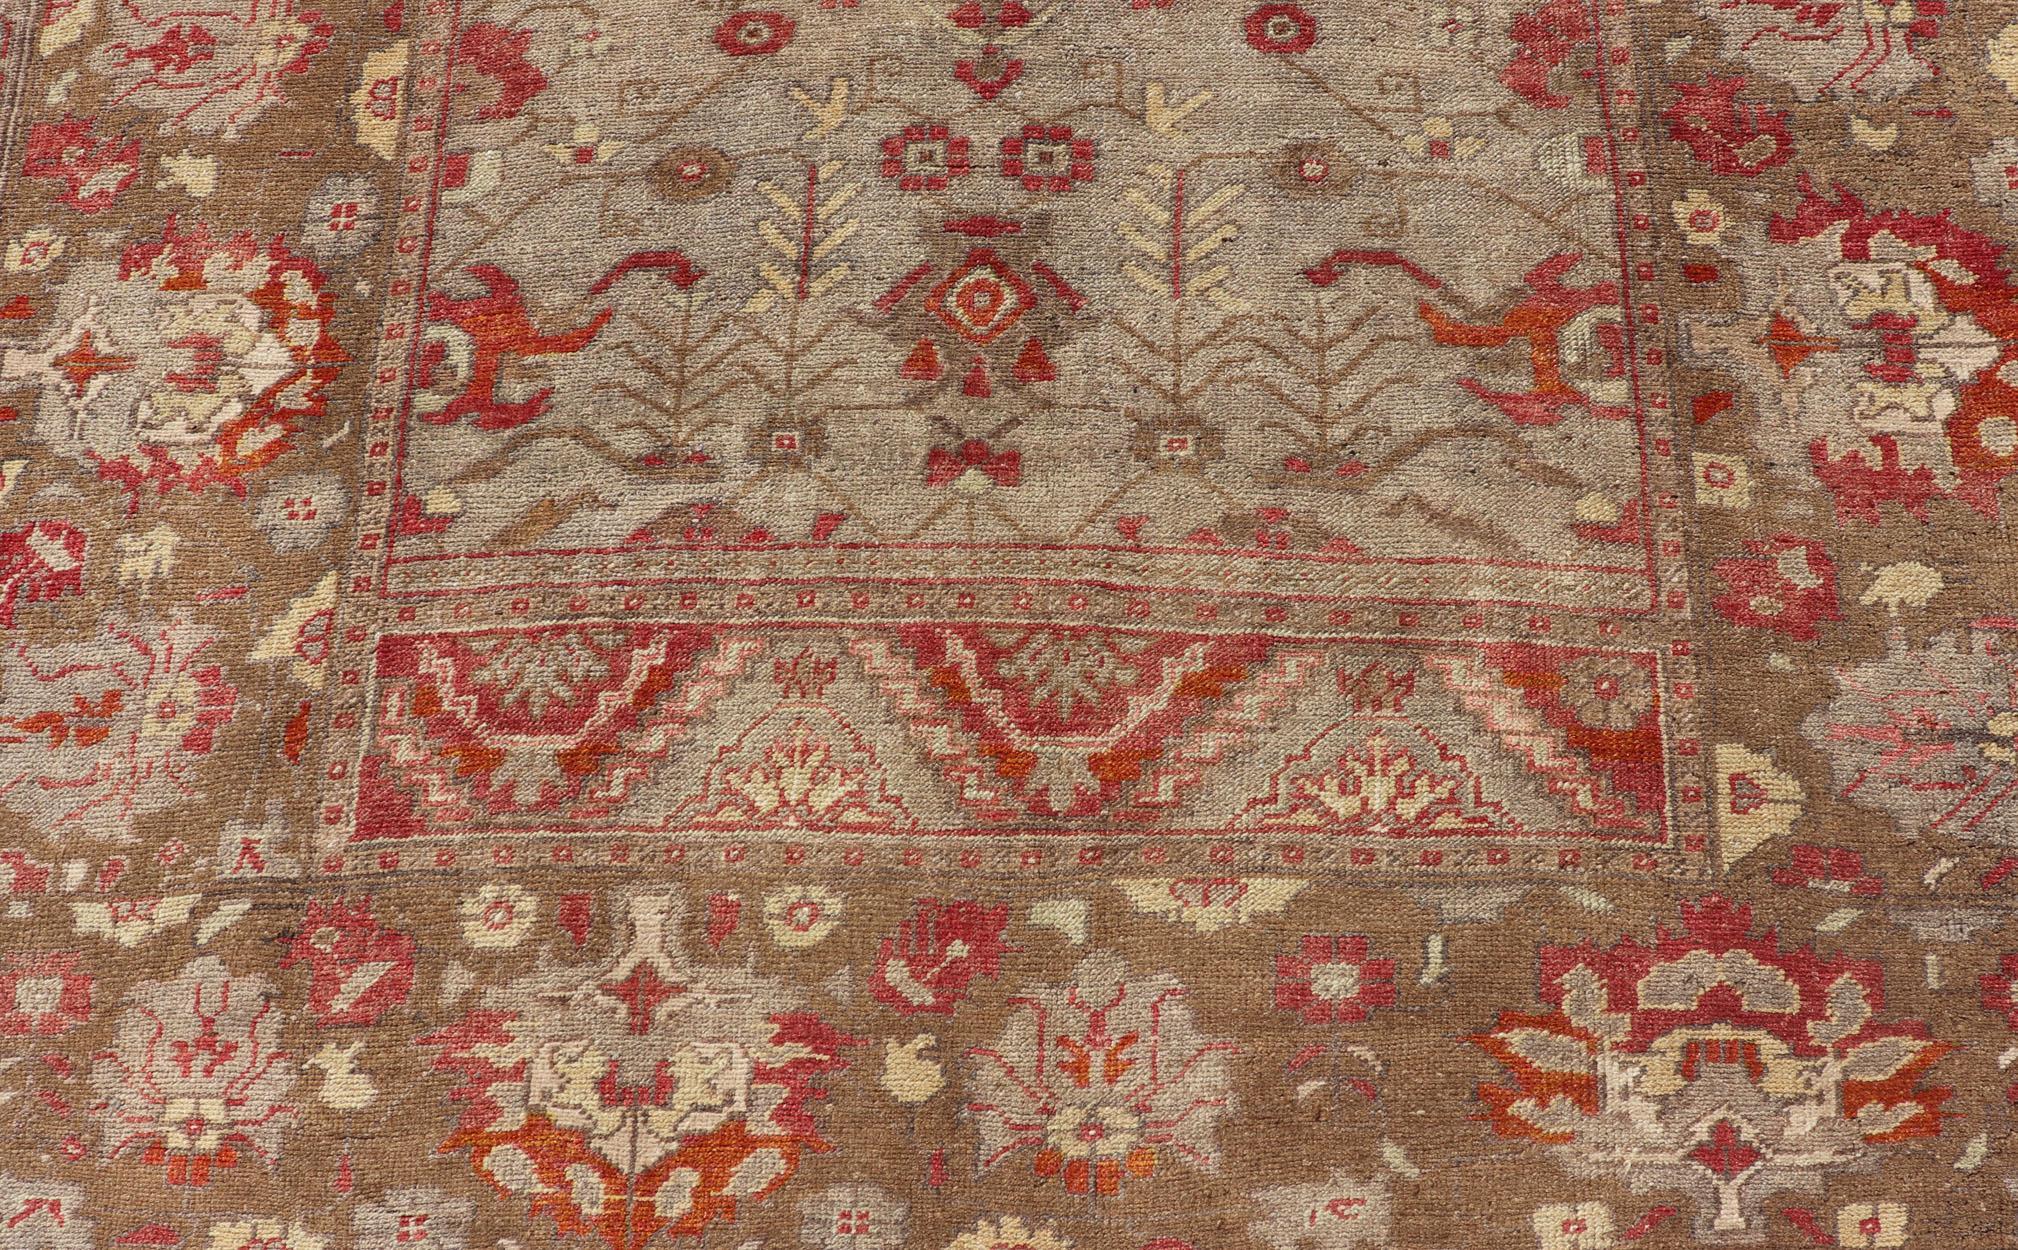 Square Size Antique Turkish Floral Oushak Rug in Green, Red Taupe & Tan For Sale 5